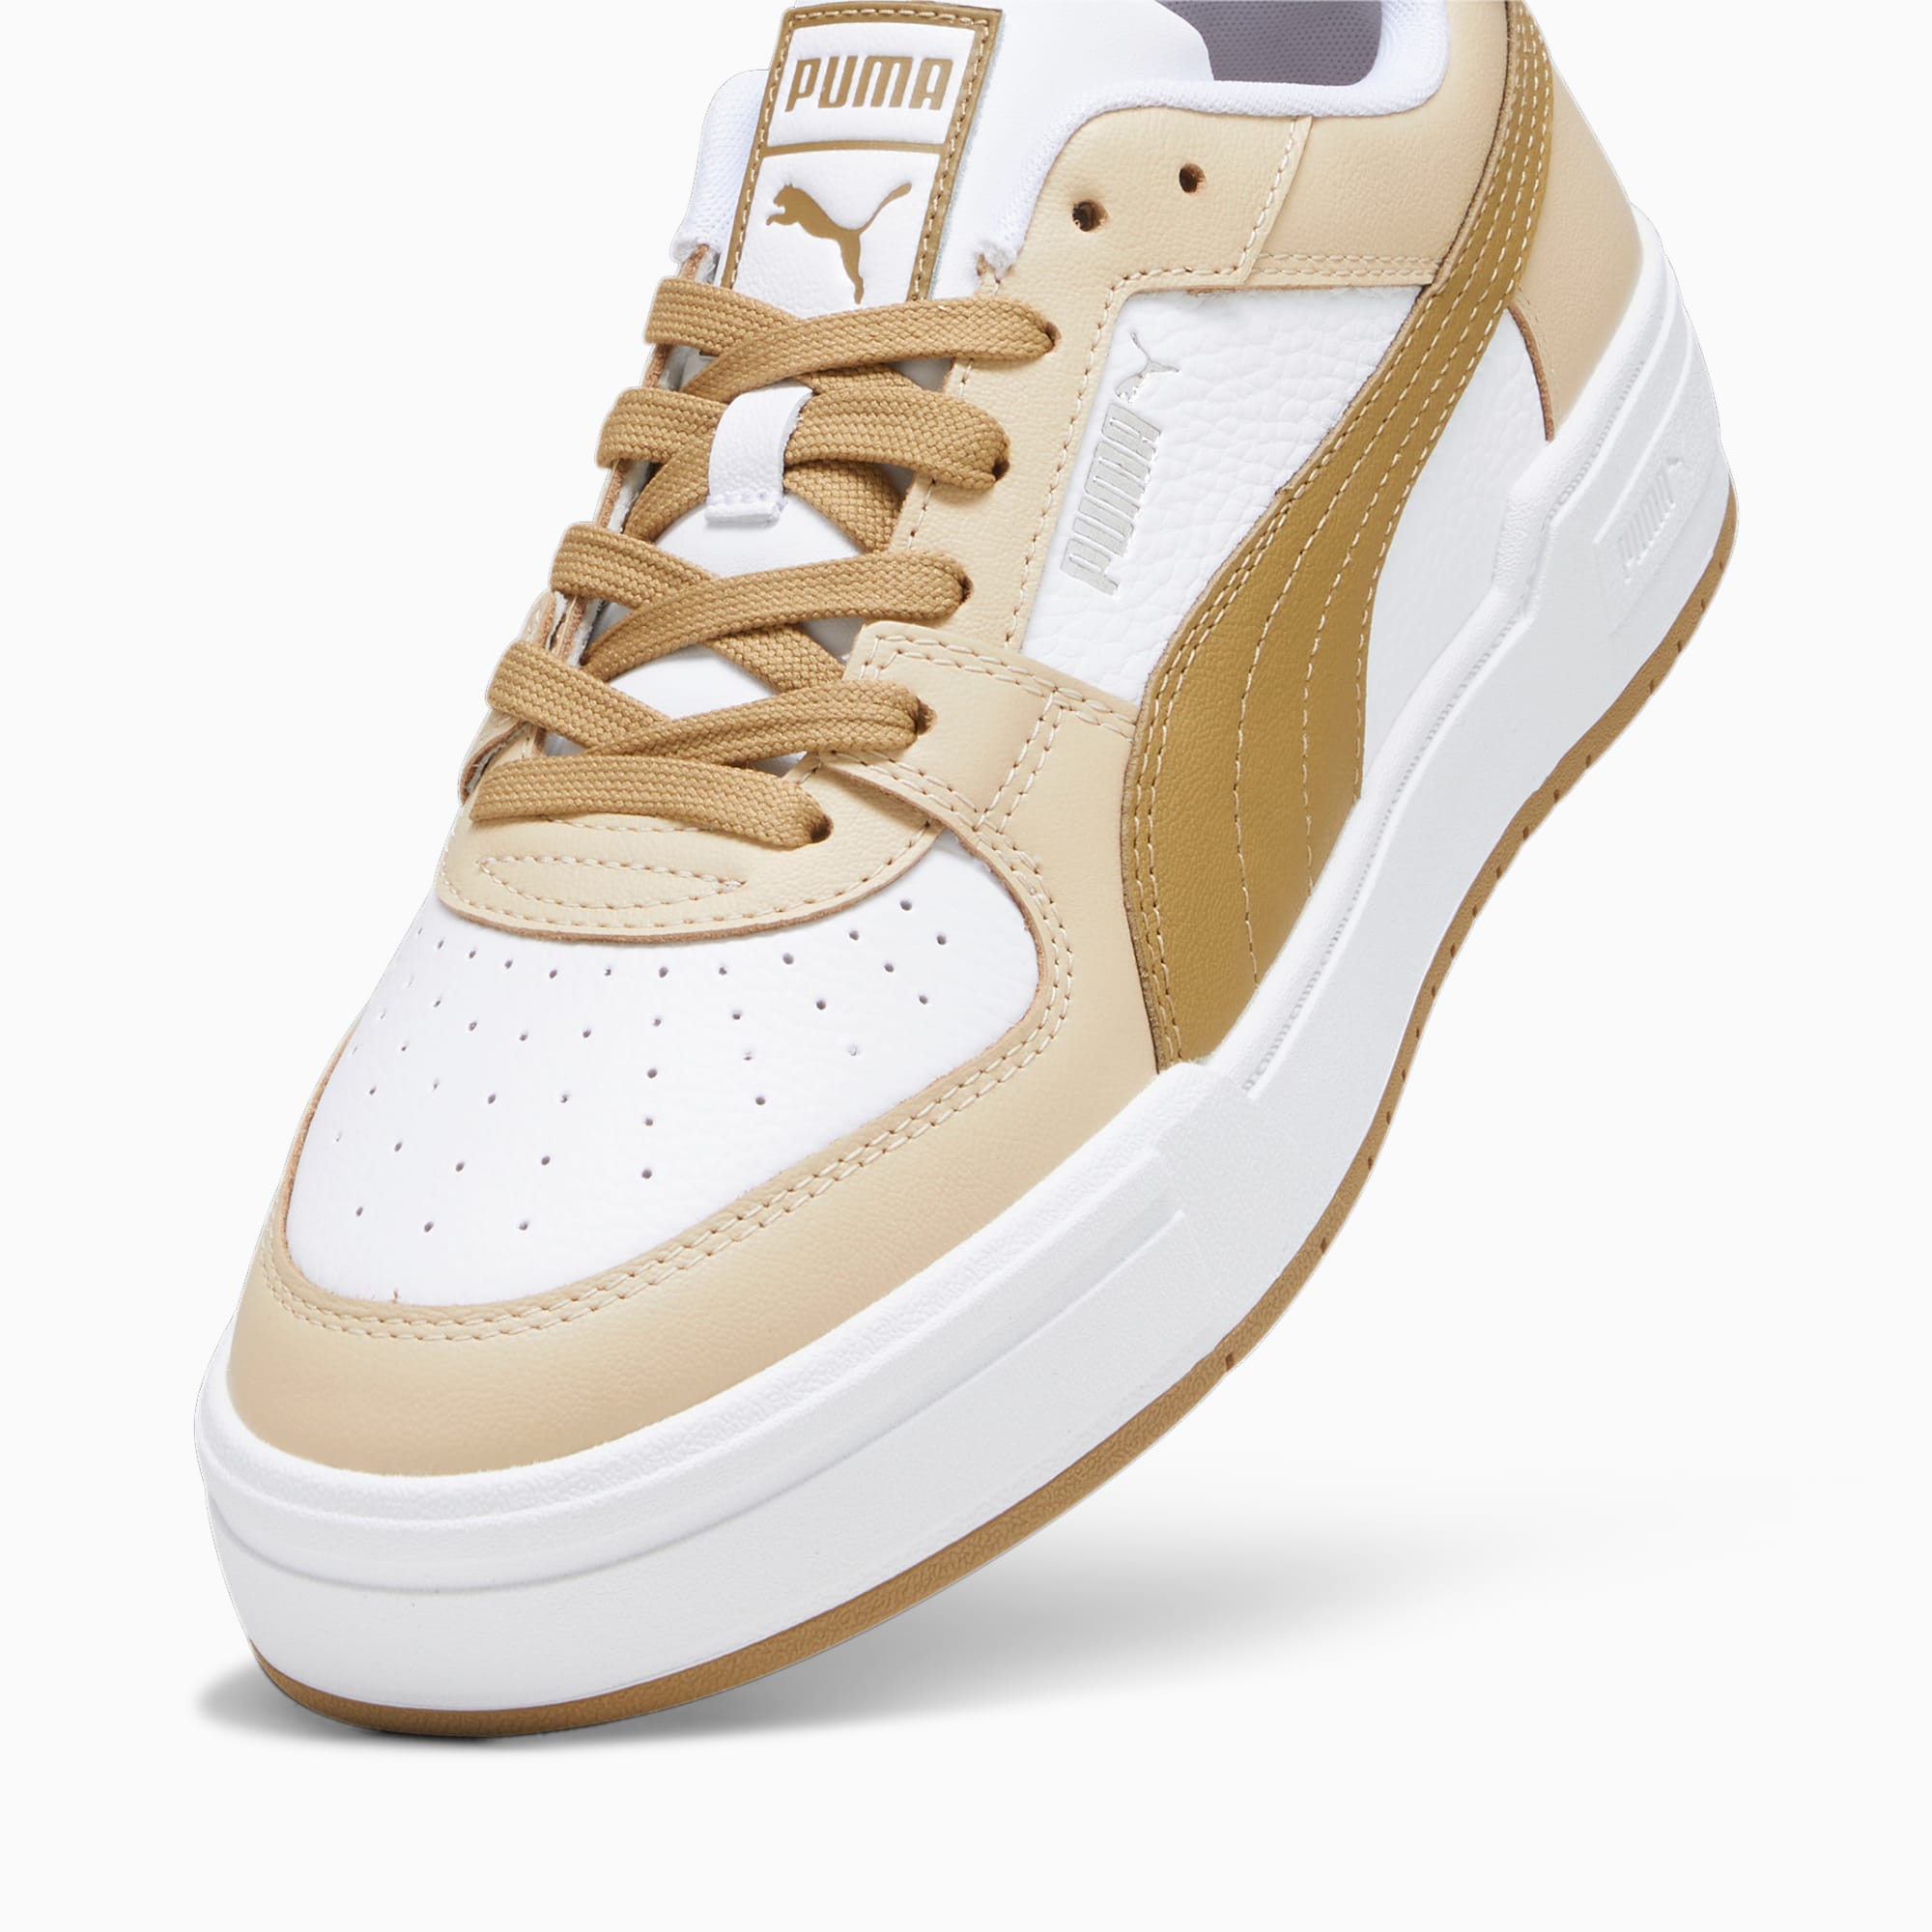 Women's PUMA Ca Pro Classic Trainers, White/Granola/Toasted, Size 45, Shoes